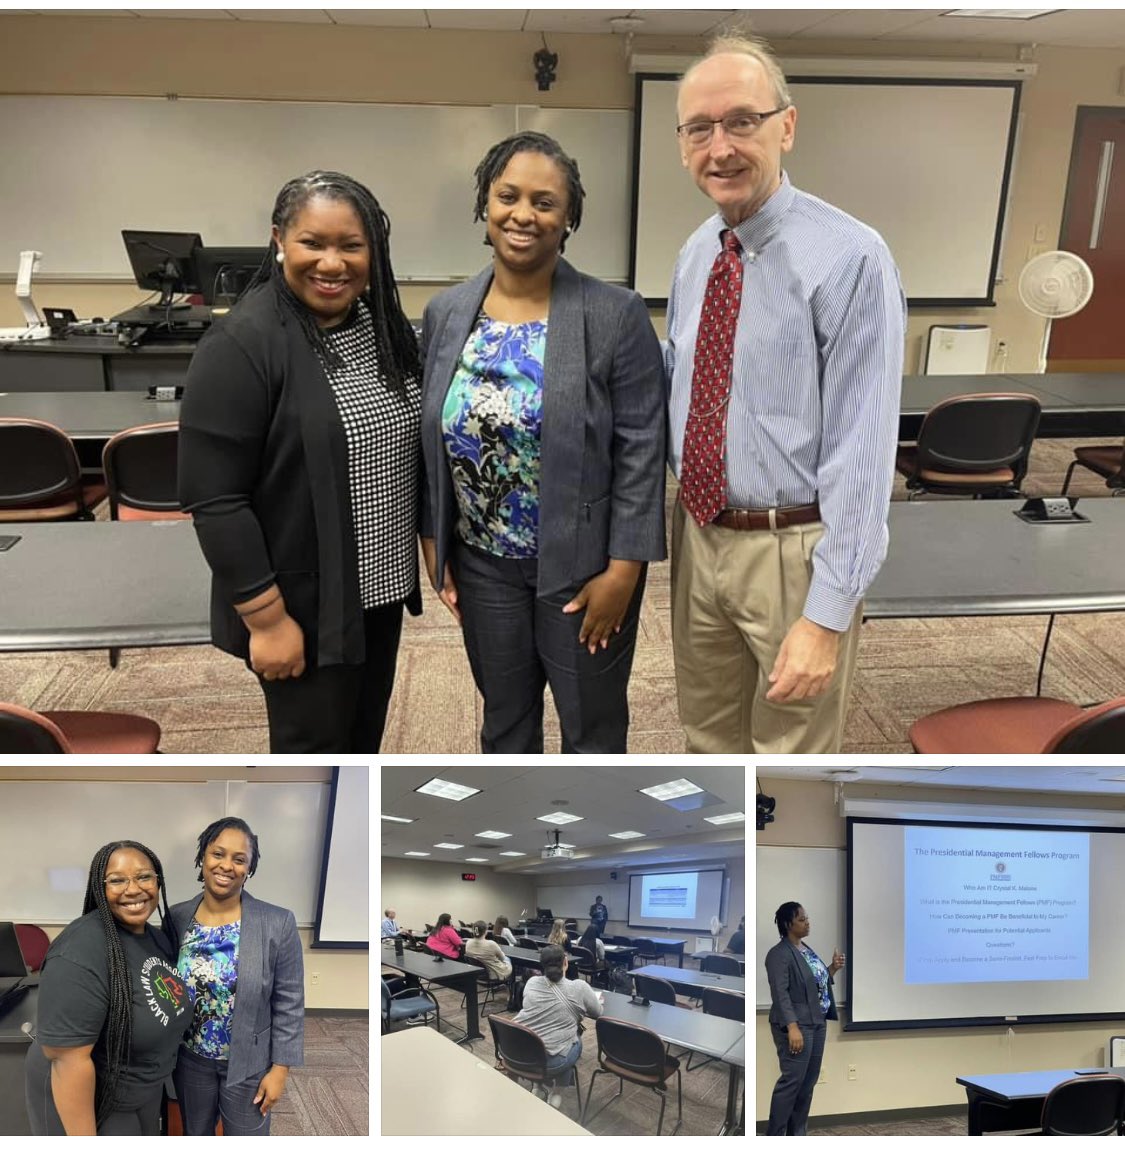 Special thanks to Crystal Malone ('15) who spoke with students about the Presidential Management Fellows (PMF) Program. Crystal is a Class of 2015 PMF and serves in the Office of the IL Governor as Associate General Counsel. #niulaw #niulawhasitall #niulawis4you #niulawproud